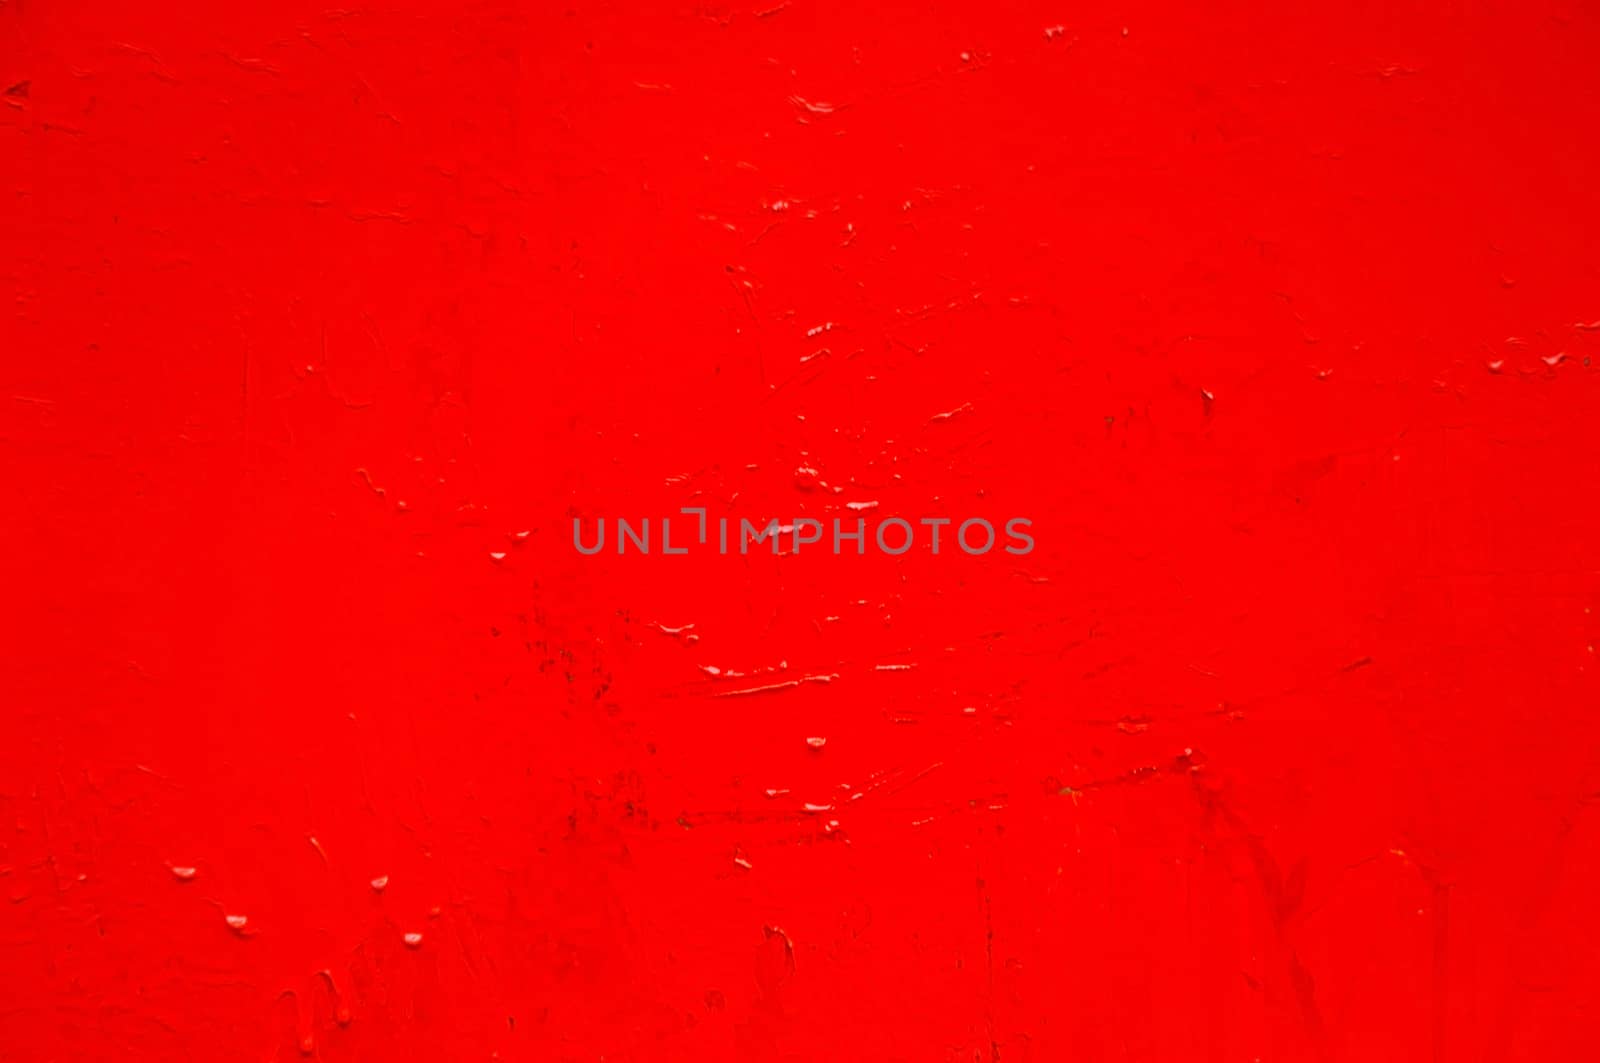 red iron plate wall background and texture